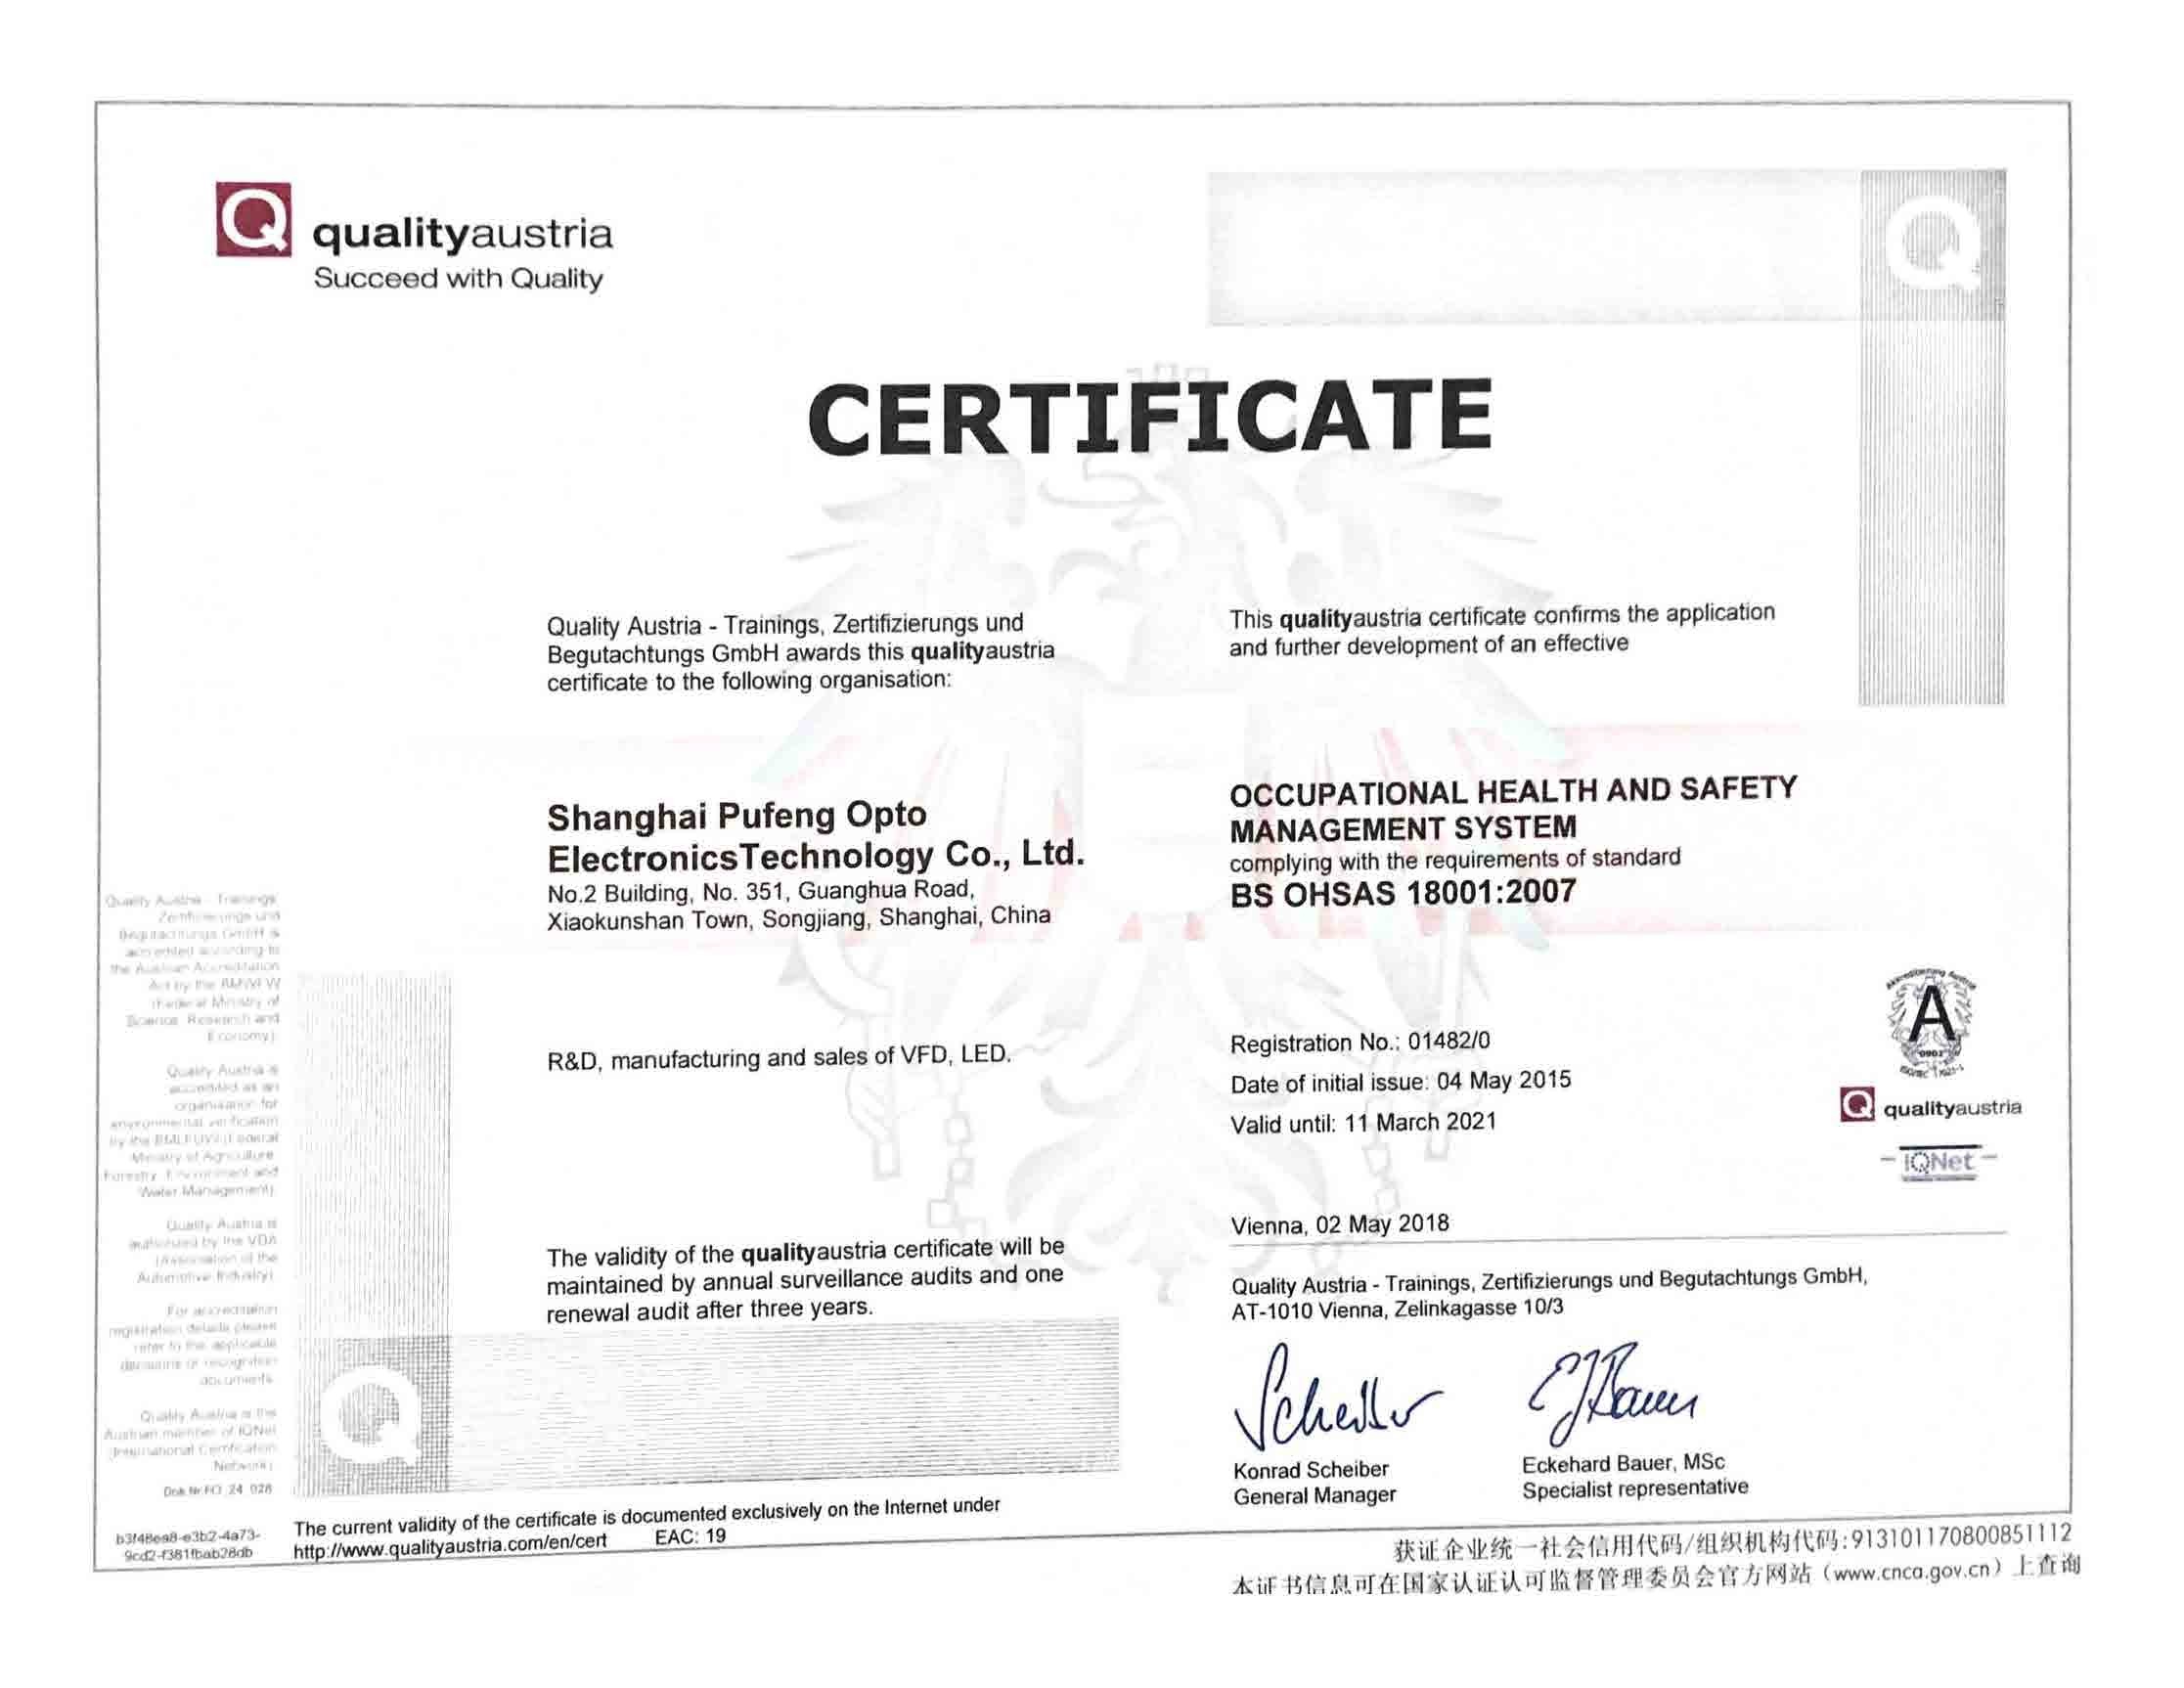 SHANGHAI PUFENG OPTO ELECTRONICS TECHNOLOGY CO.,LTD. Certifications